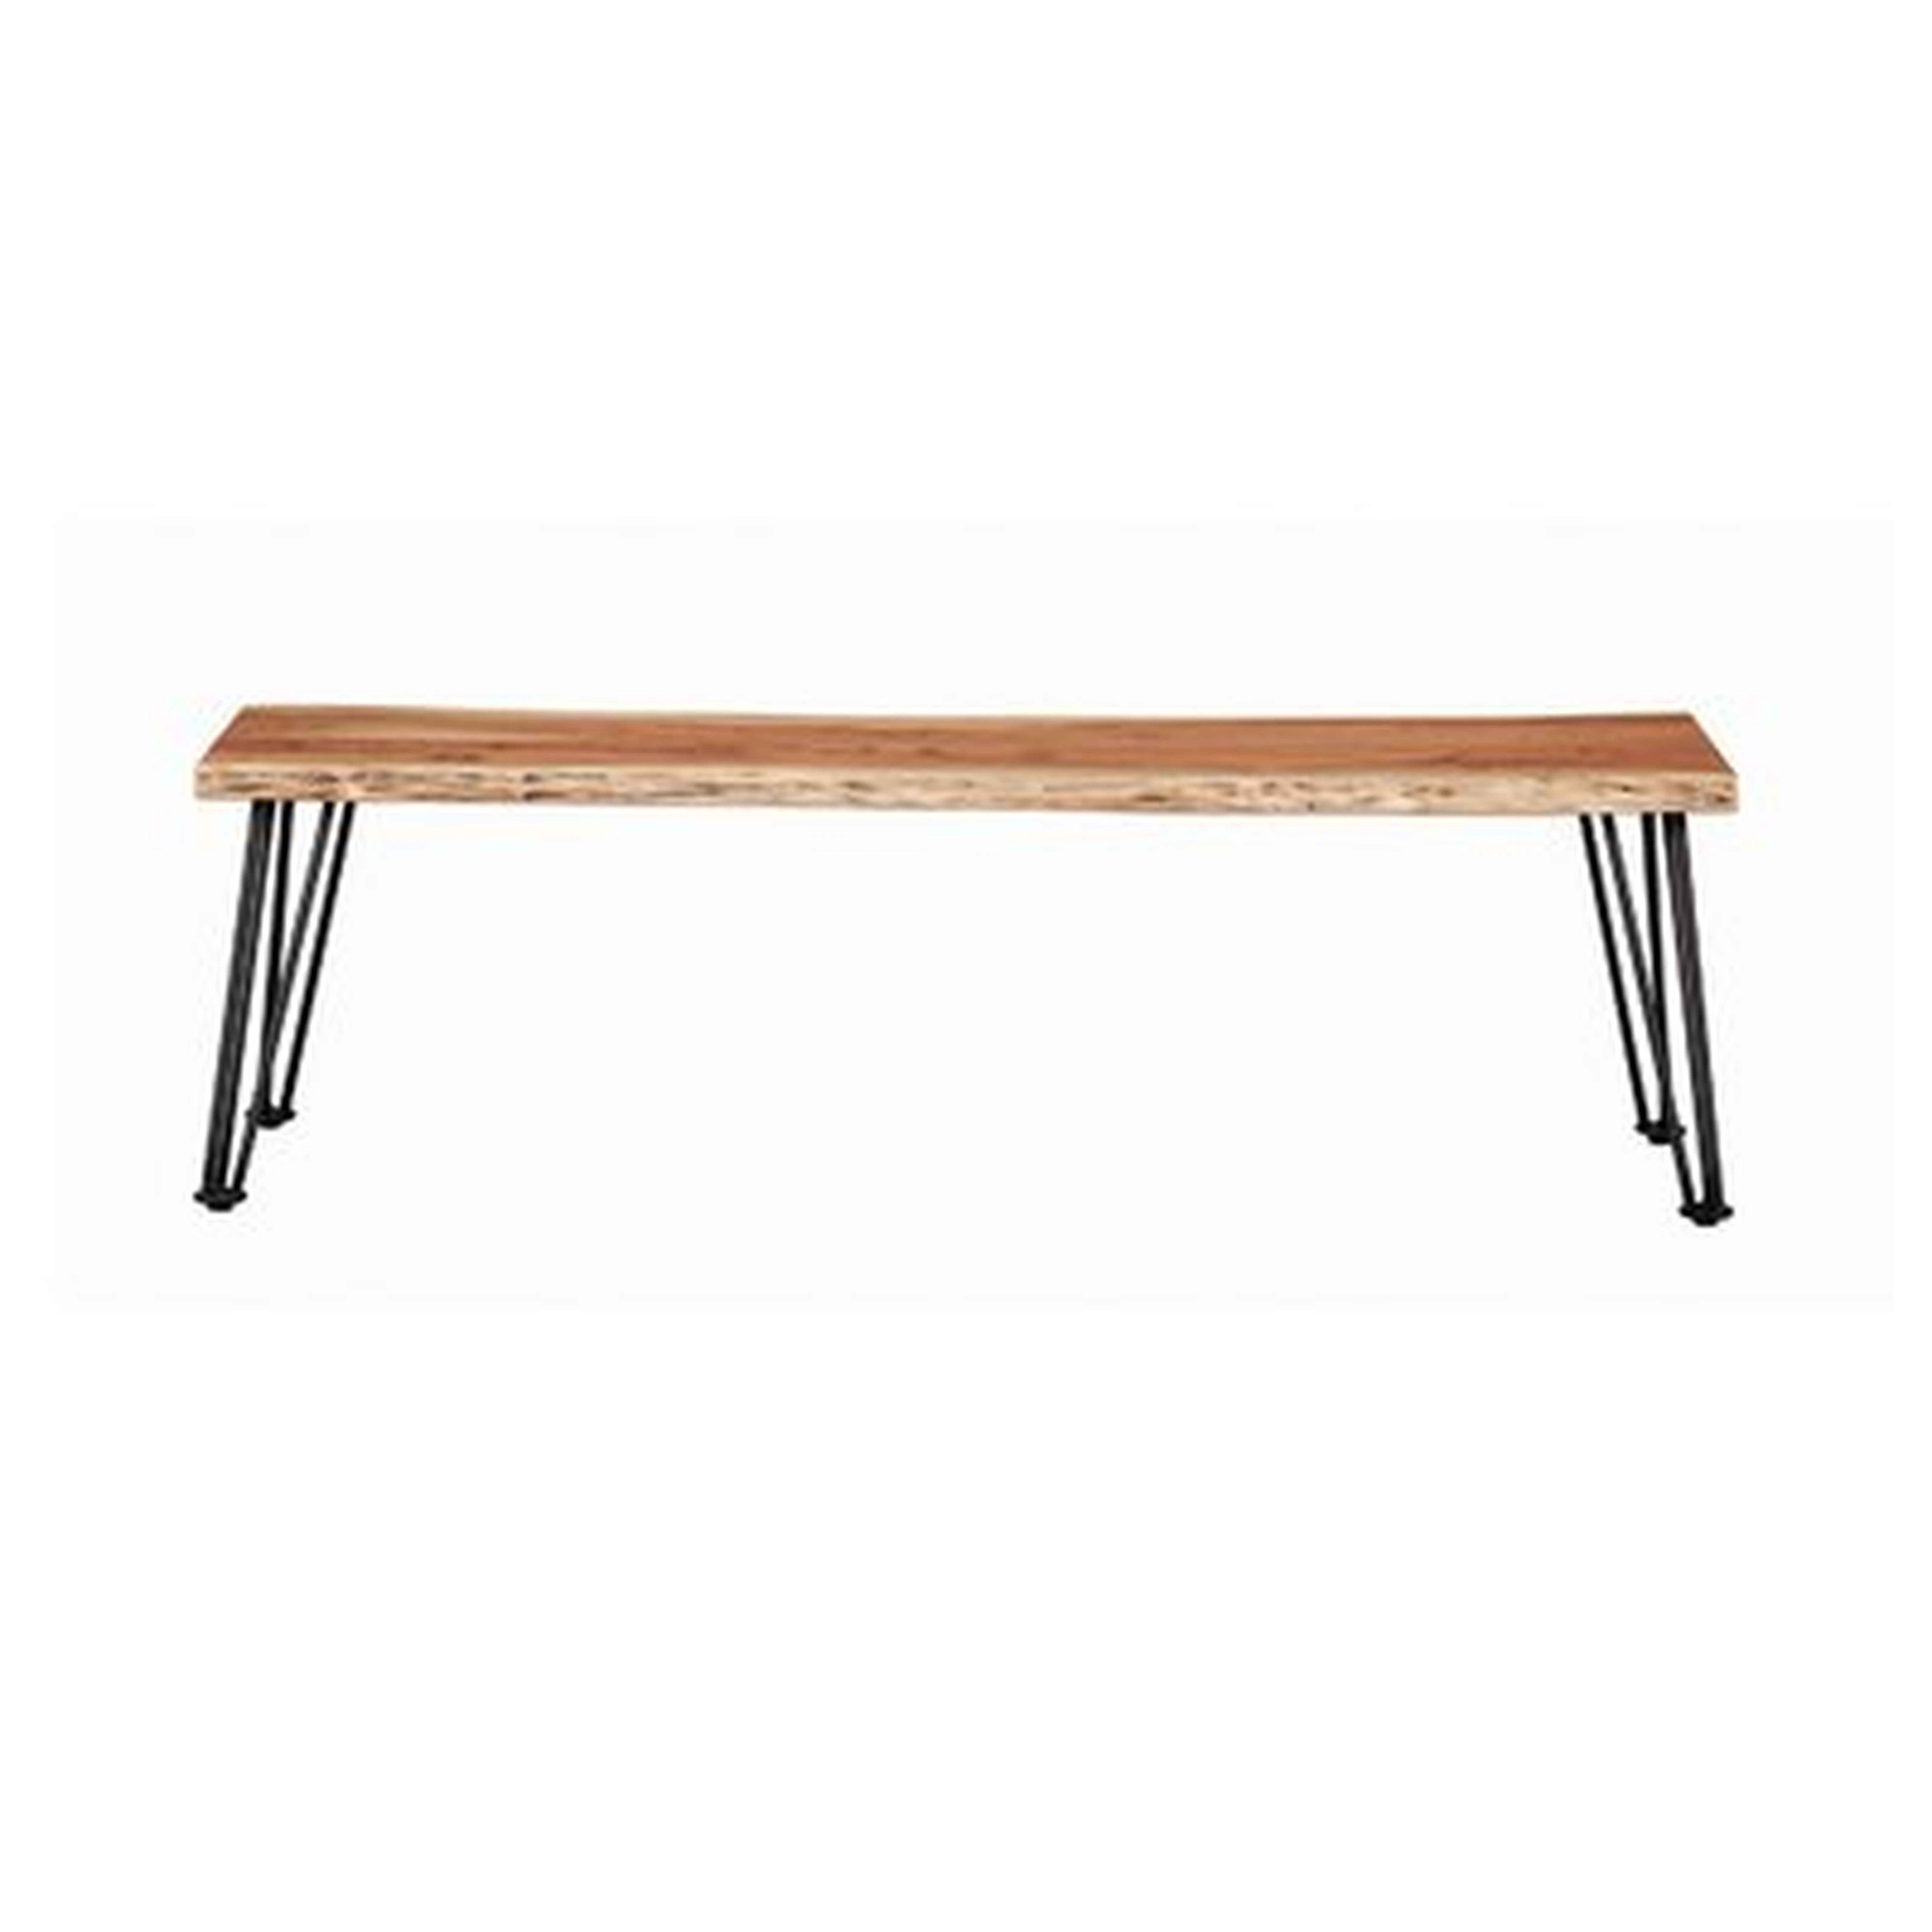 Wooden Dining Bench With Live Edge Details And Metal Legs, Brown - Wayfair